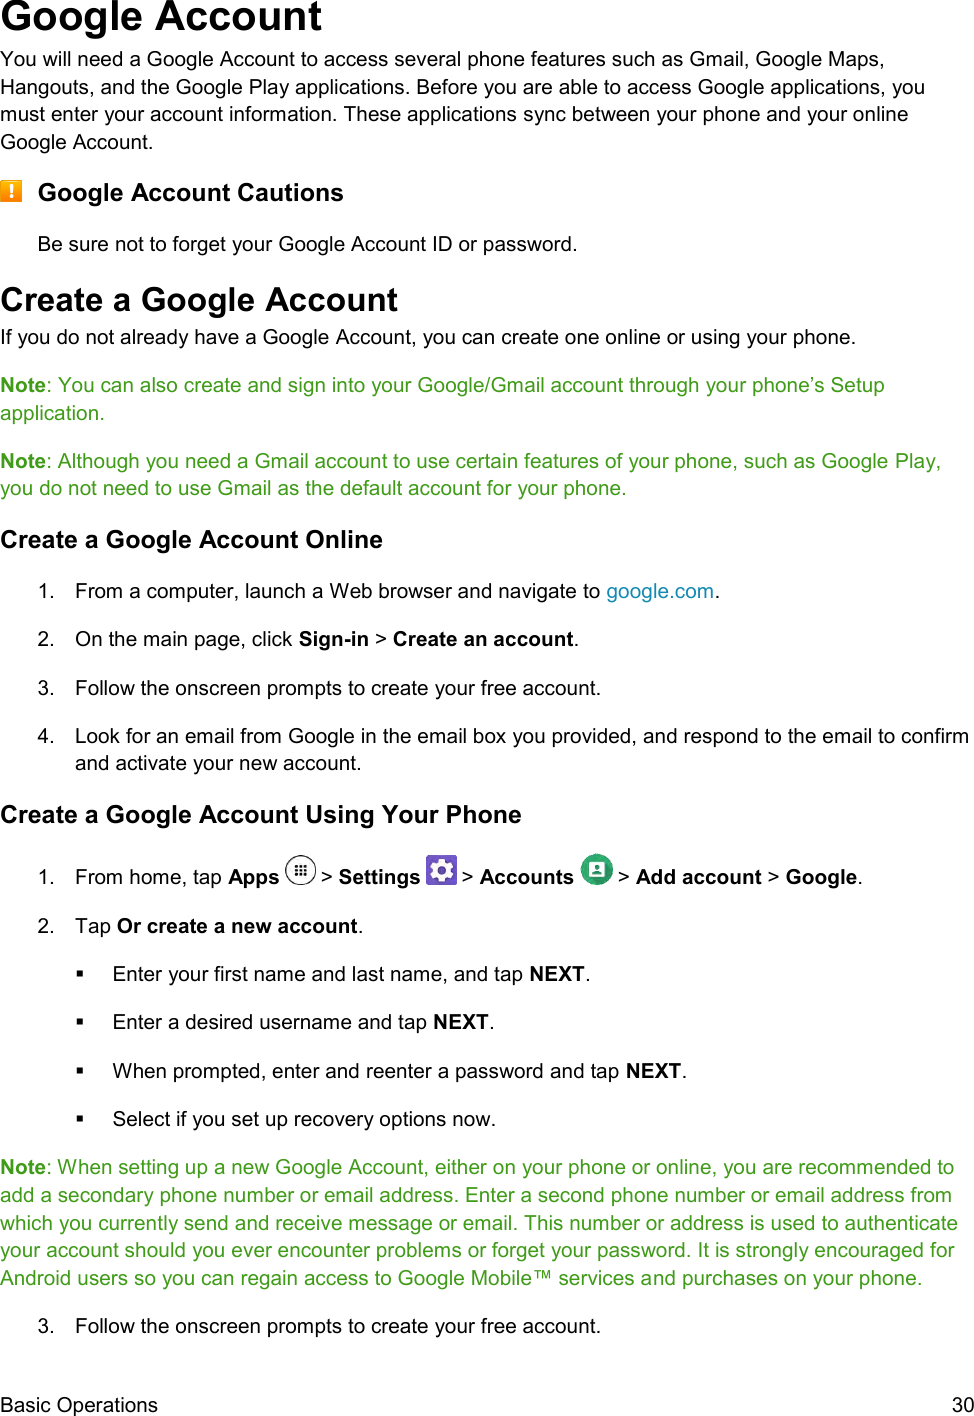  Basic Operations  30 Google Account You will need a Google Account to access several phone features such as Gmail, Google Maps, Hangouts, and the Google Play applications. Before you are able to access Google applications, you must enter your account information. These applications sync between your phone and your online Google Account.  Google Account Cautions Be sure not to forget your Google Account ID or password. Create a Google Account If you do not already have a Google Account, you can create one online or using your phone. Note: You can also create and sign into your Google/Gmail account through your phone’s Setup application. Note: Although you need a Gmail account to use certain features of your phone, such as Google Play, you do not need to use Gmail as the default account for your phone. Create a Google Account Online 1.  From a computer, launch a Web browser and navigate to google.com. 2.  On the main page, click Sign-in &gt; Create an account. 3.  Follow the onscreen prompts to create your free account. 4.  Look for an email from Google in the email box you provided, and respond to the email to confirm and activate your new account. Create a Google Account Using Your Phone 1.  From home, tap Apps   &gt; Settings   &gt; Accounts   &gt; Add account &gt; Google. 2.  Tap Or create a new account.   Enter your first name and last name, and tap NEXT.    Enter a desired username and tap NEXT.    When prompted, enter and reenter a password and tap NEXT.    Select if you set up recovery options now.  Note: When setting up a new Google Account, either on your phone or online, you are recommended to add a secondary phone number or email address. Enter a second phone number or email address from which you currently send and receive message or email. This number or address is used to authenticate your account should you ever encounter problems or forget your password. It is strongly encouraged for Android users so you can regain access to Google Mobile™ services and purchases on your phone. 3.  Follow the onscreen prompts to create your free account. 